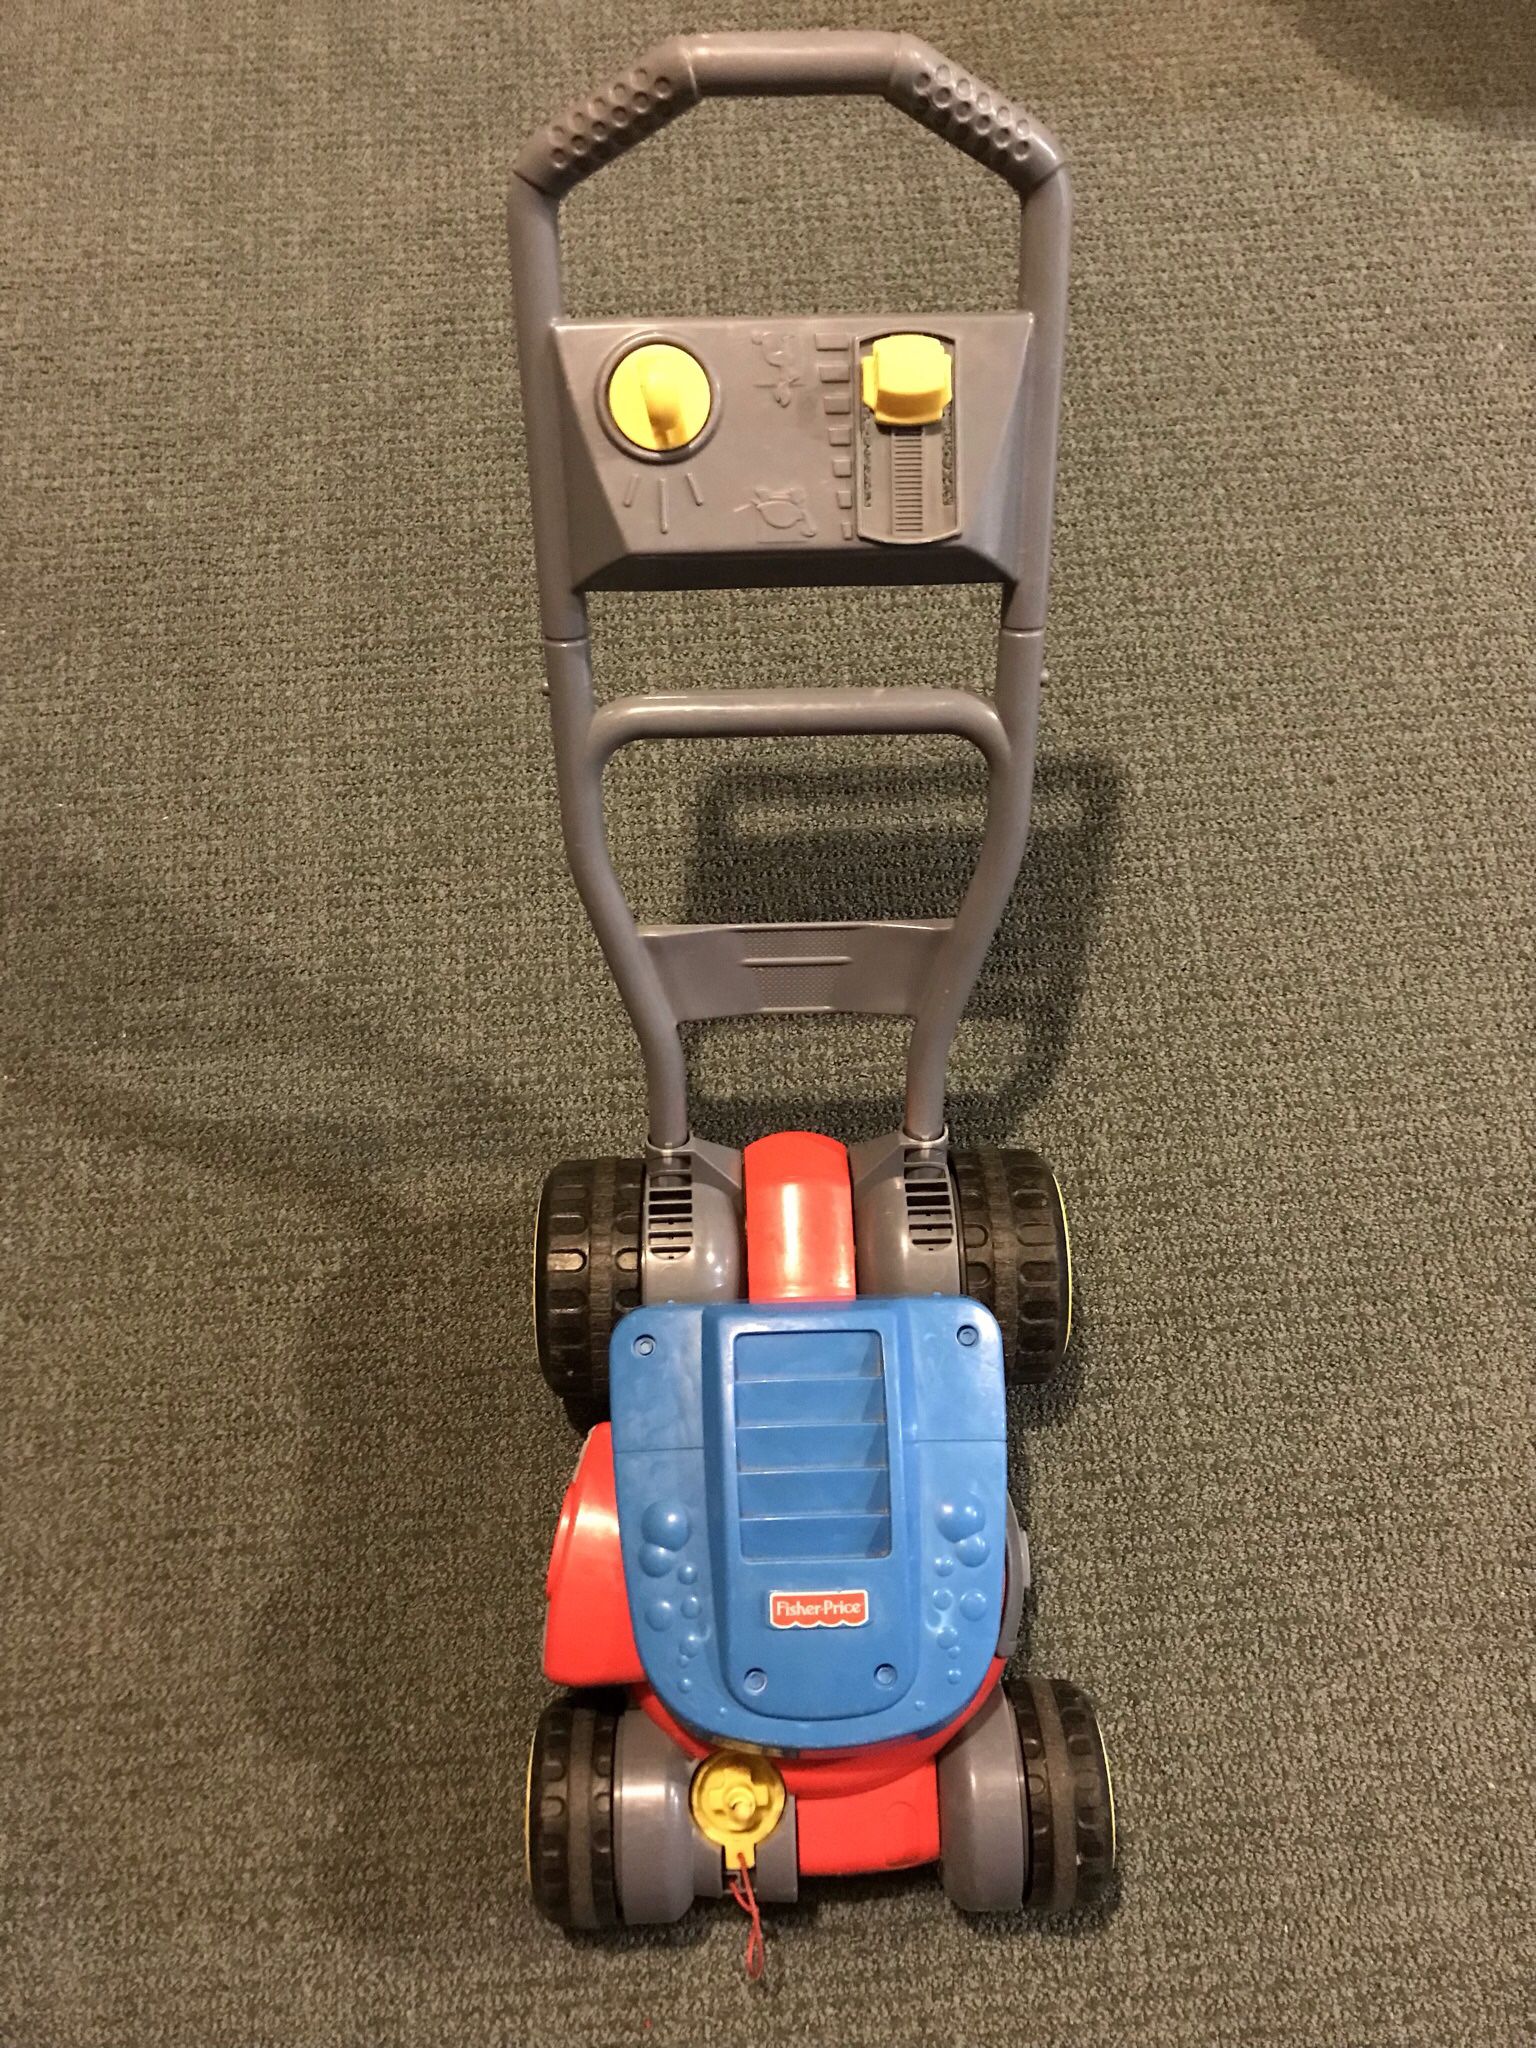 Fisher Price Bubble Mower